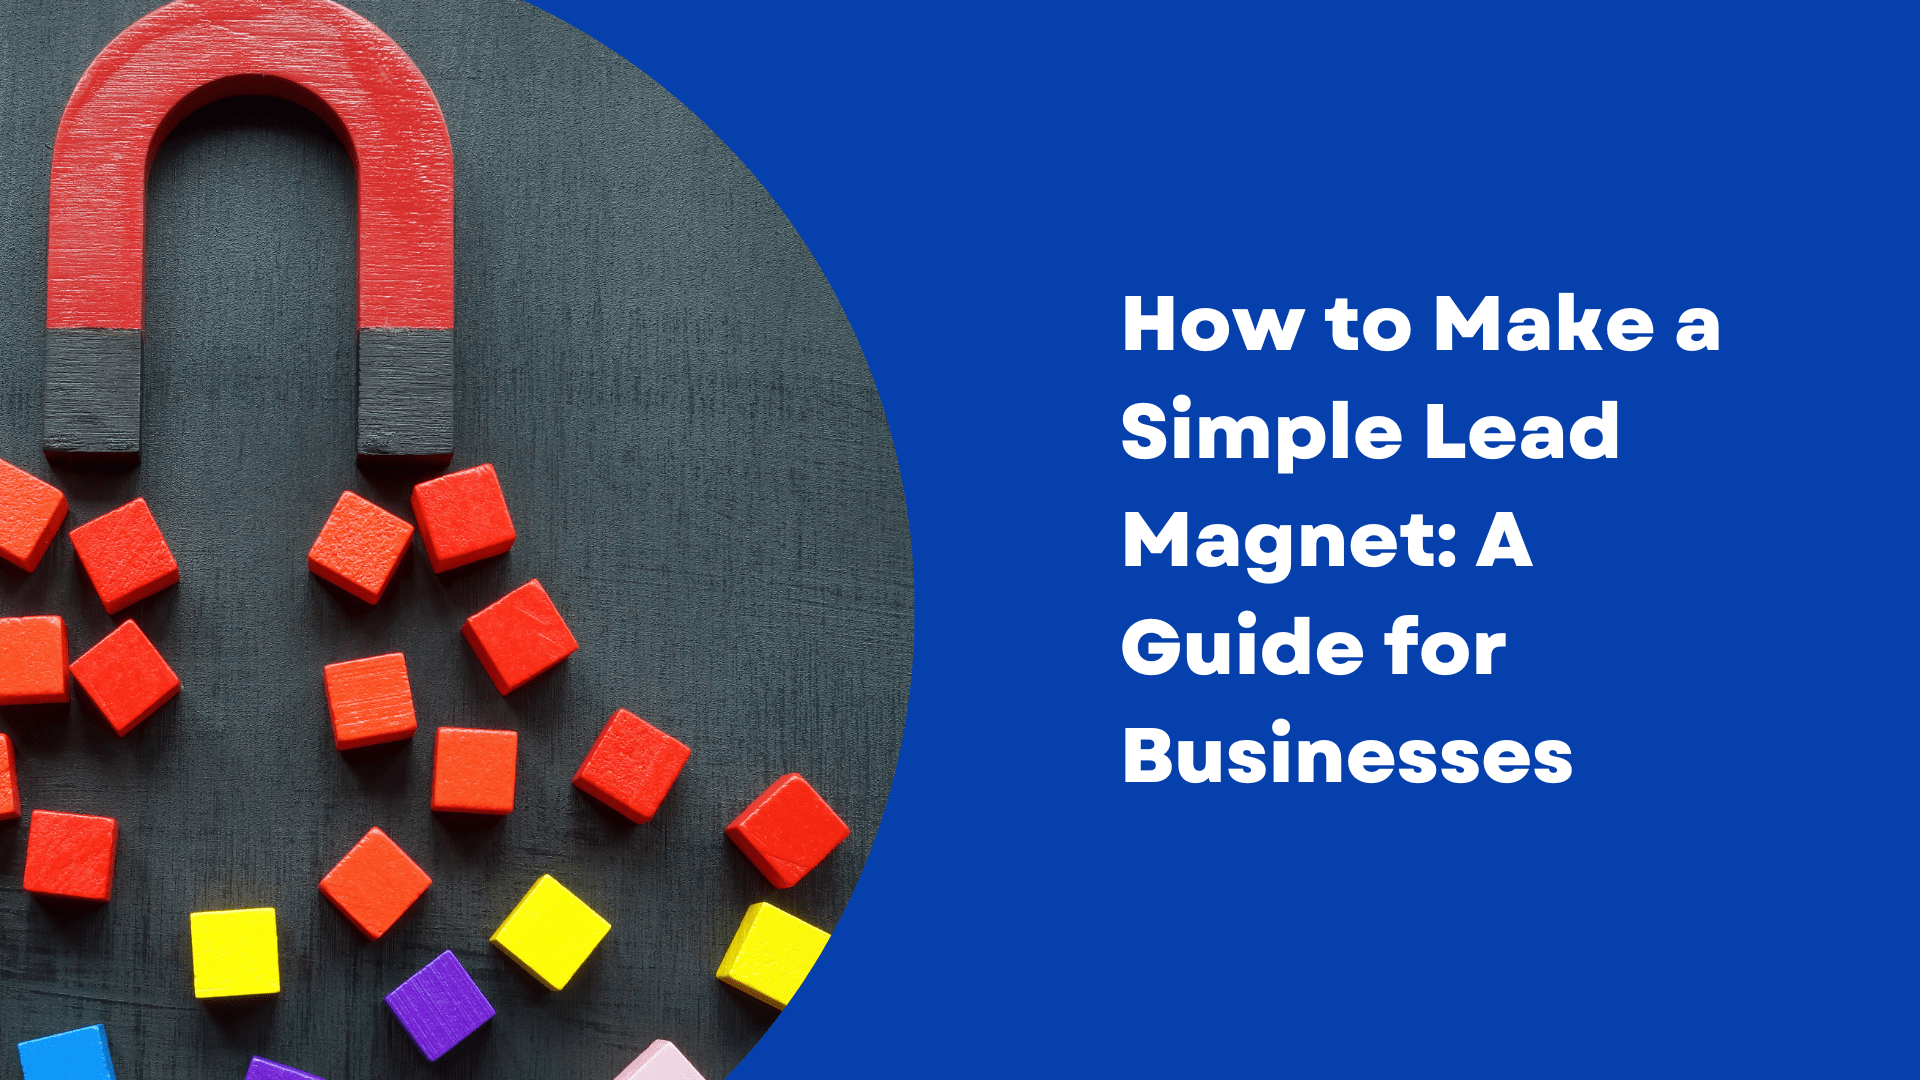 How to Make a Simple Lead Magnet: A Guide for Businesses